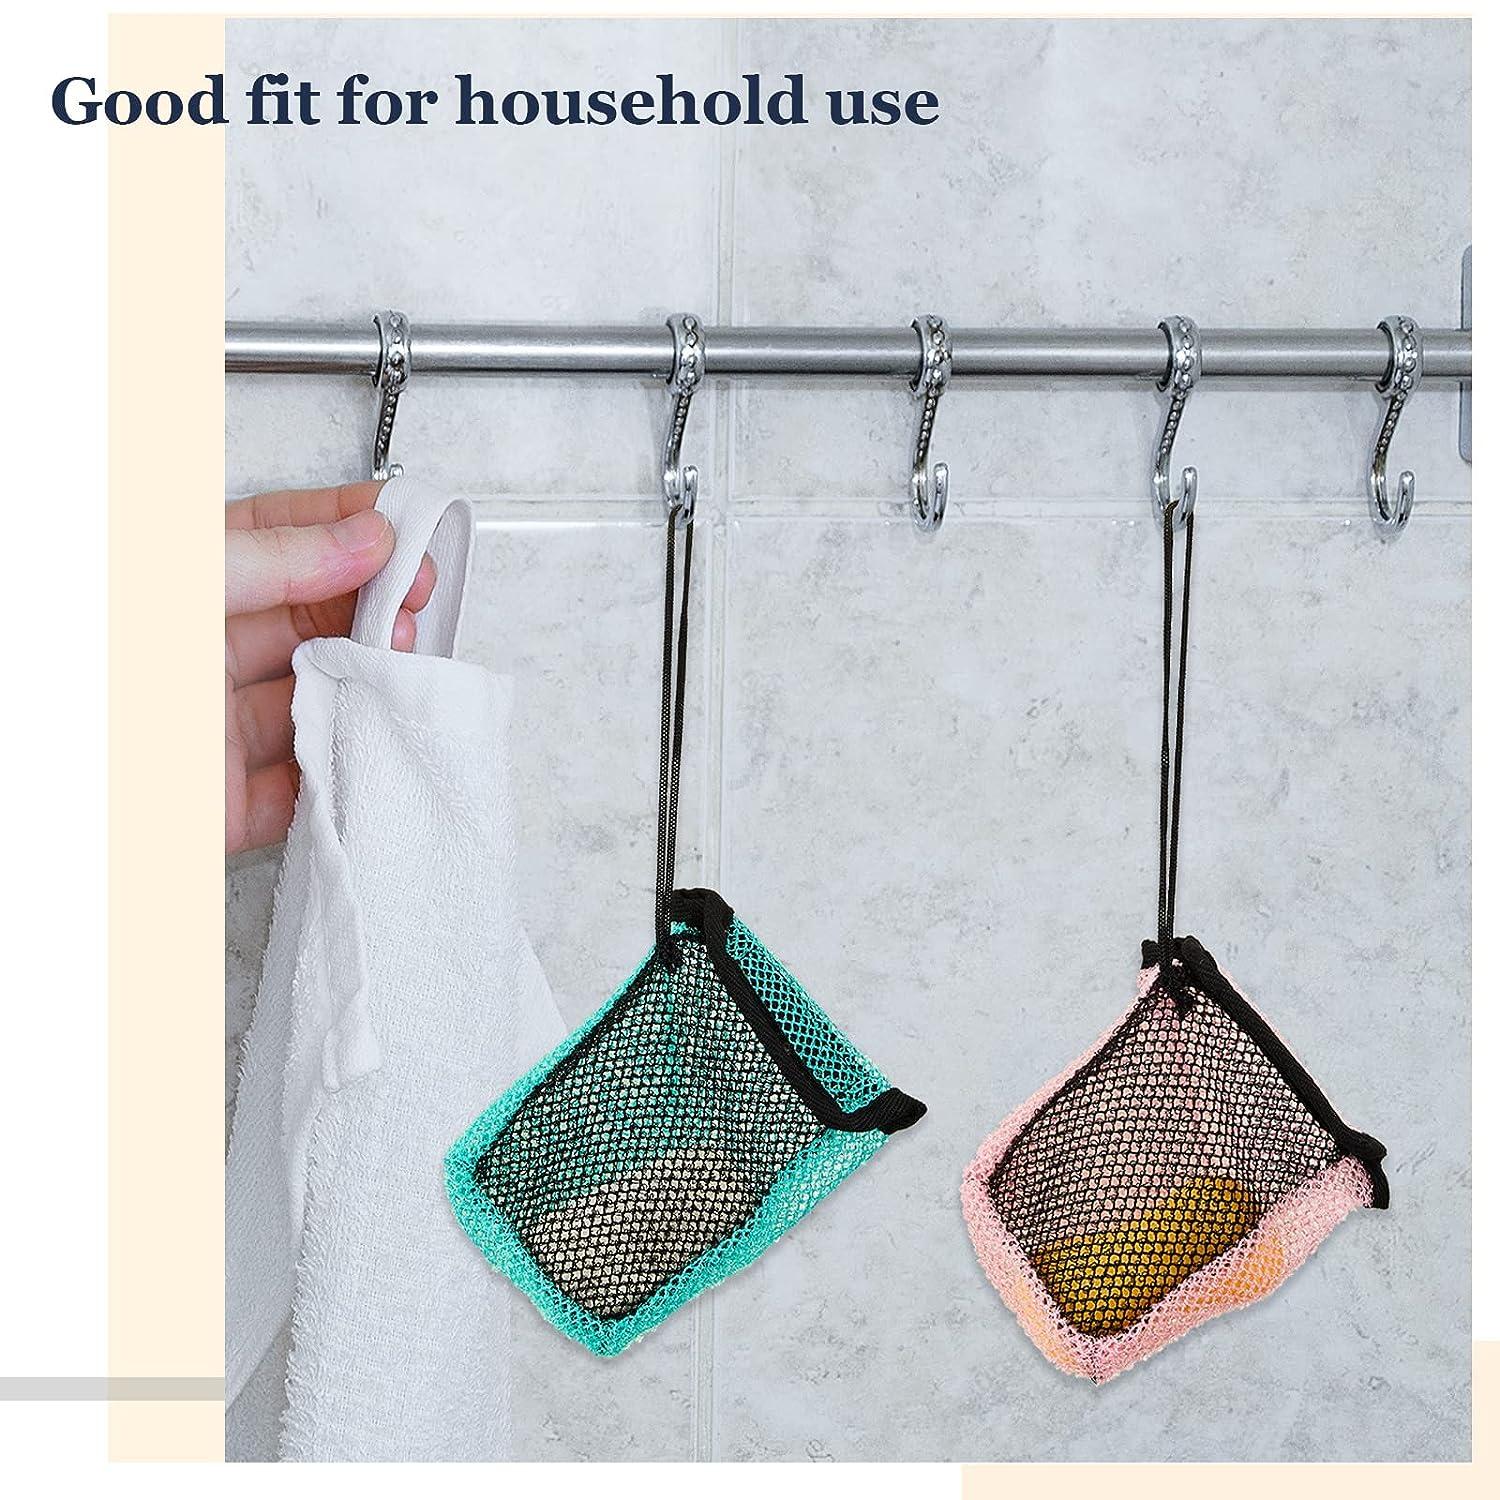 5 Pack Soap Bag Waste Mesh Bar Soap Loofah Holder Pouch For Shower GFF